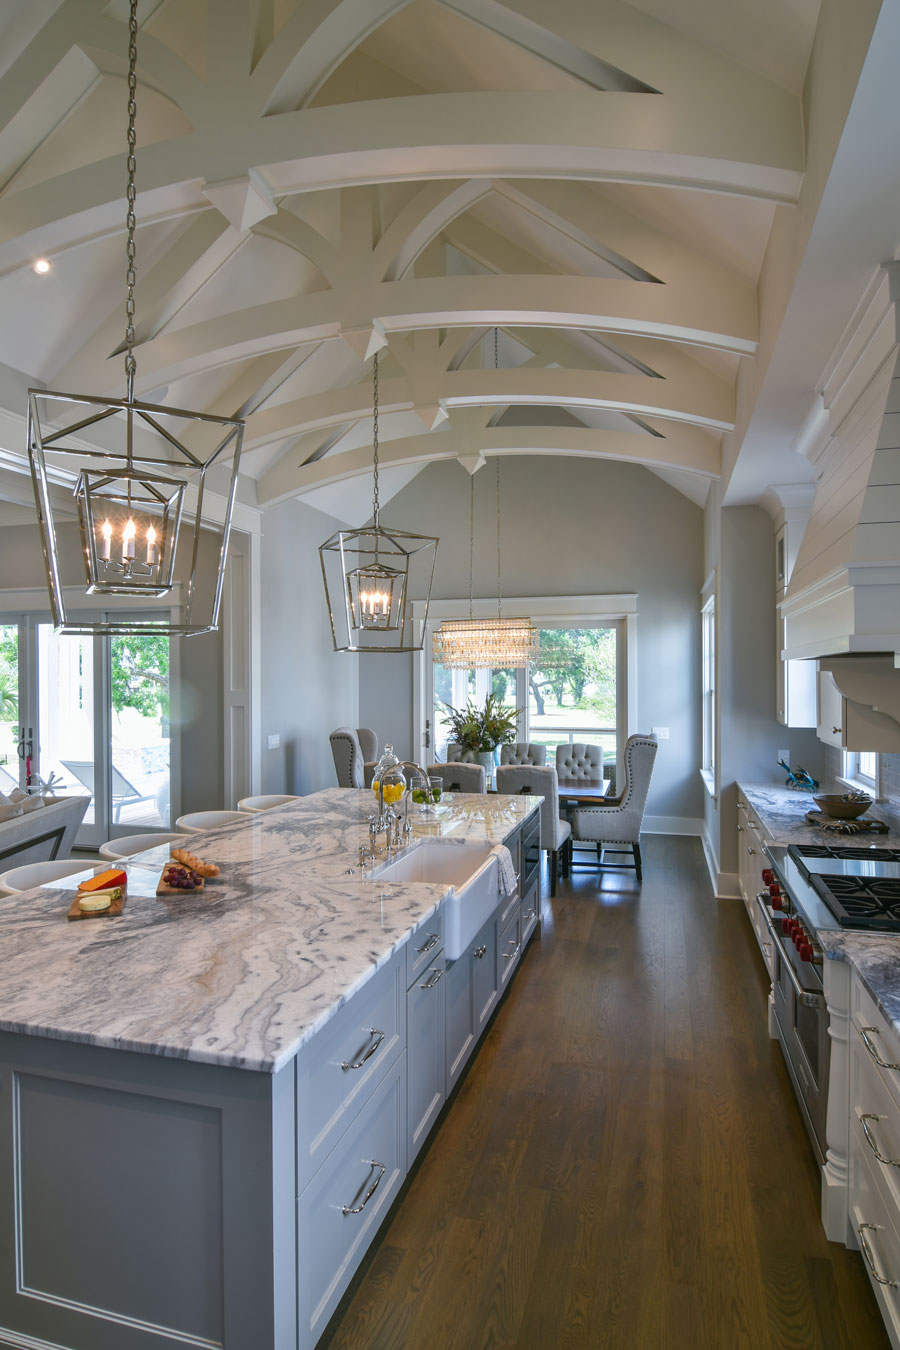 White and gray kitchen with extensive truss work, cathedral ceiling